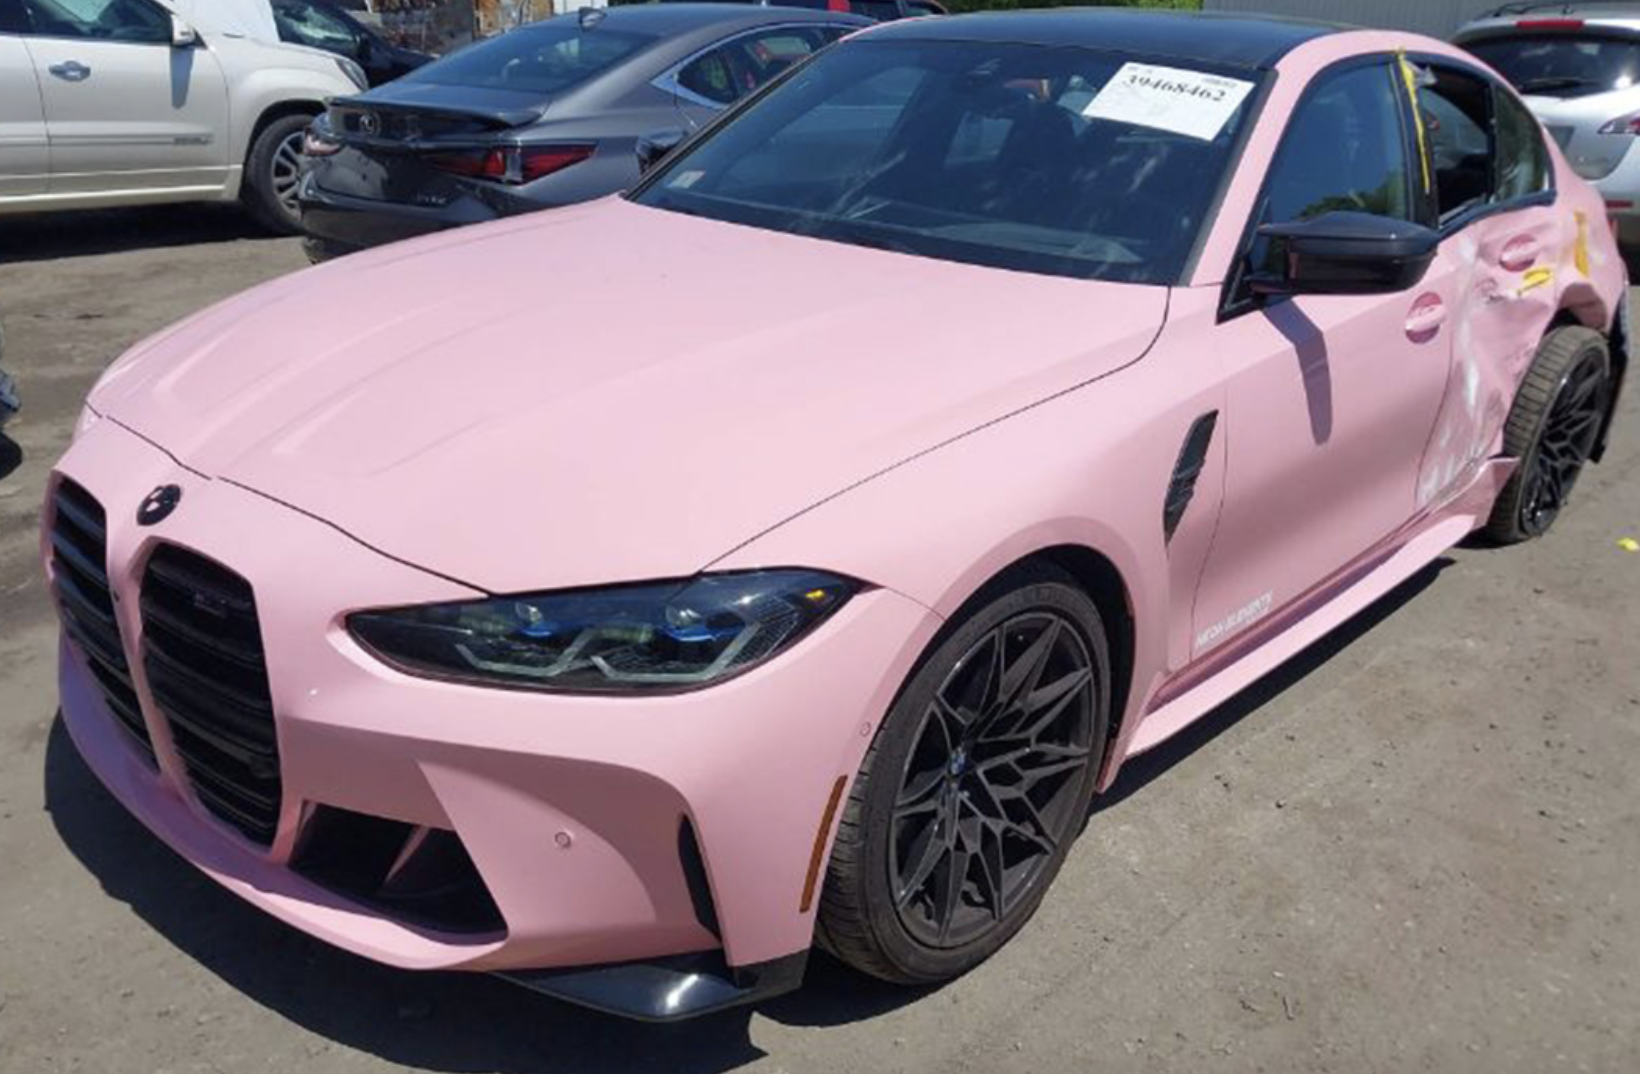 Crashed baby blue and bright pink BMW G80 M3 for sale at auction.